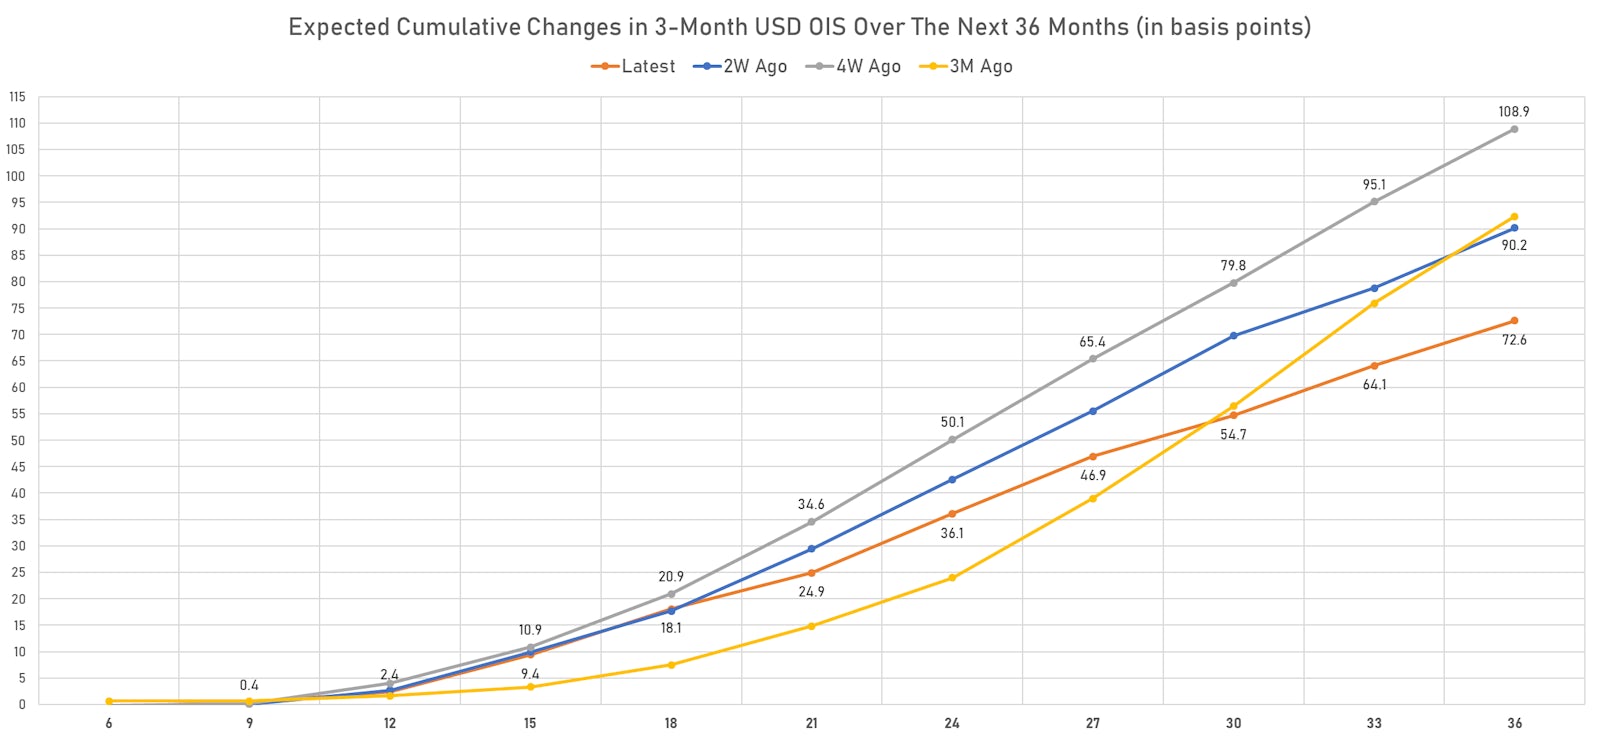 Implied Rate Hikes From The 3-Month USD OIS Forward Curve | Sources: ϕpost, Refinitiv data